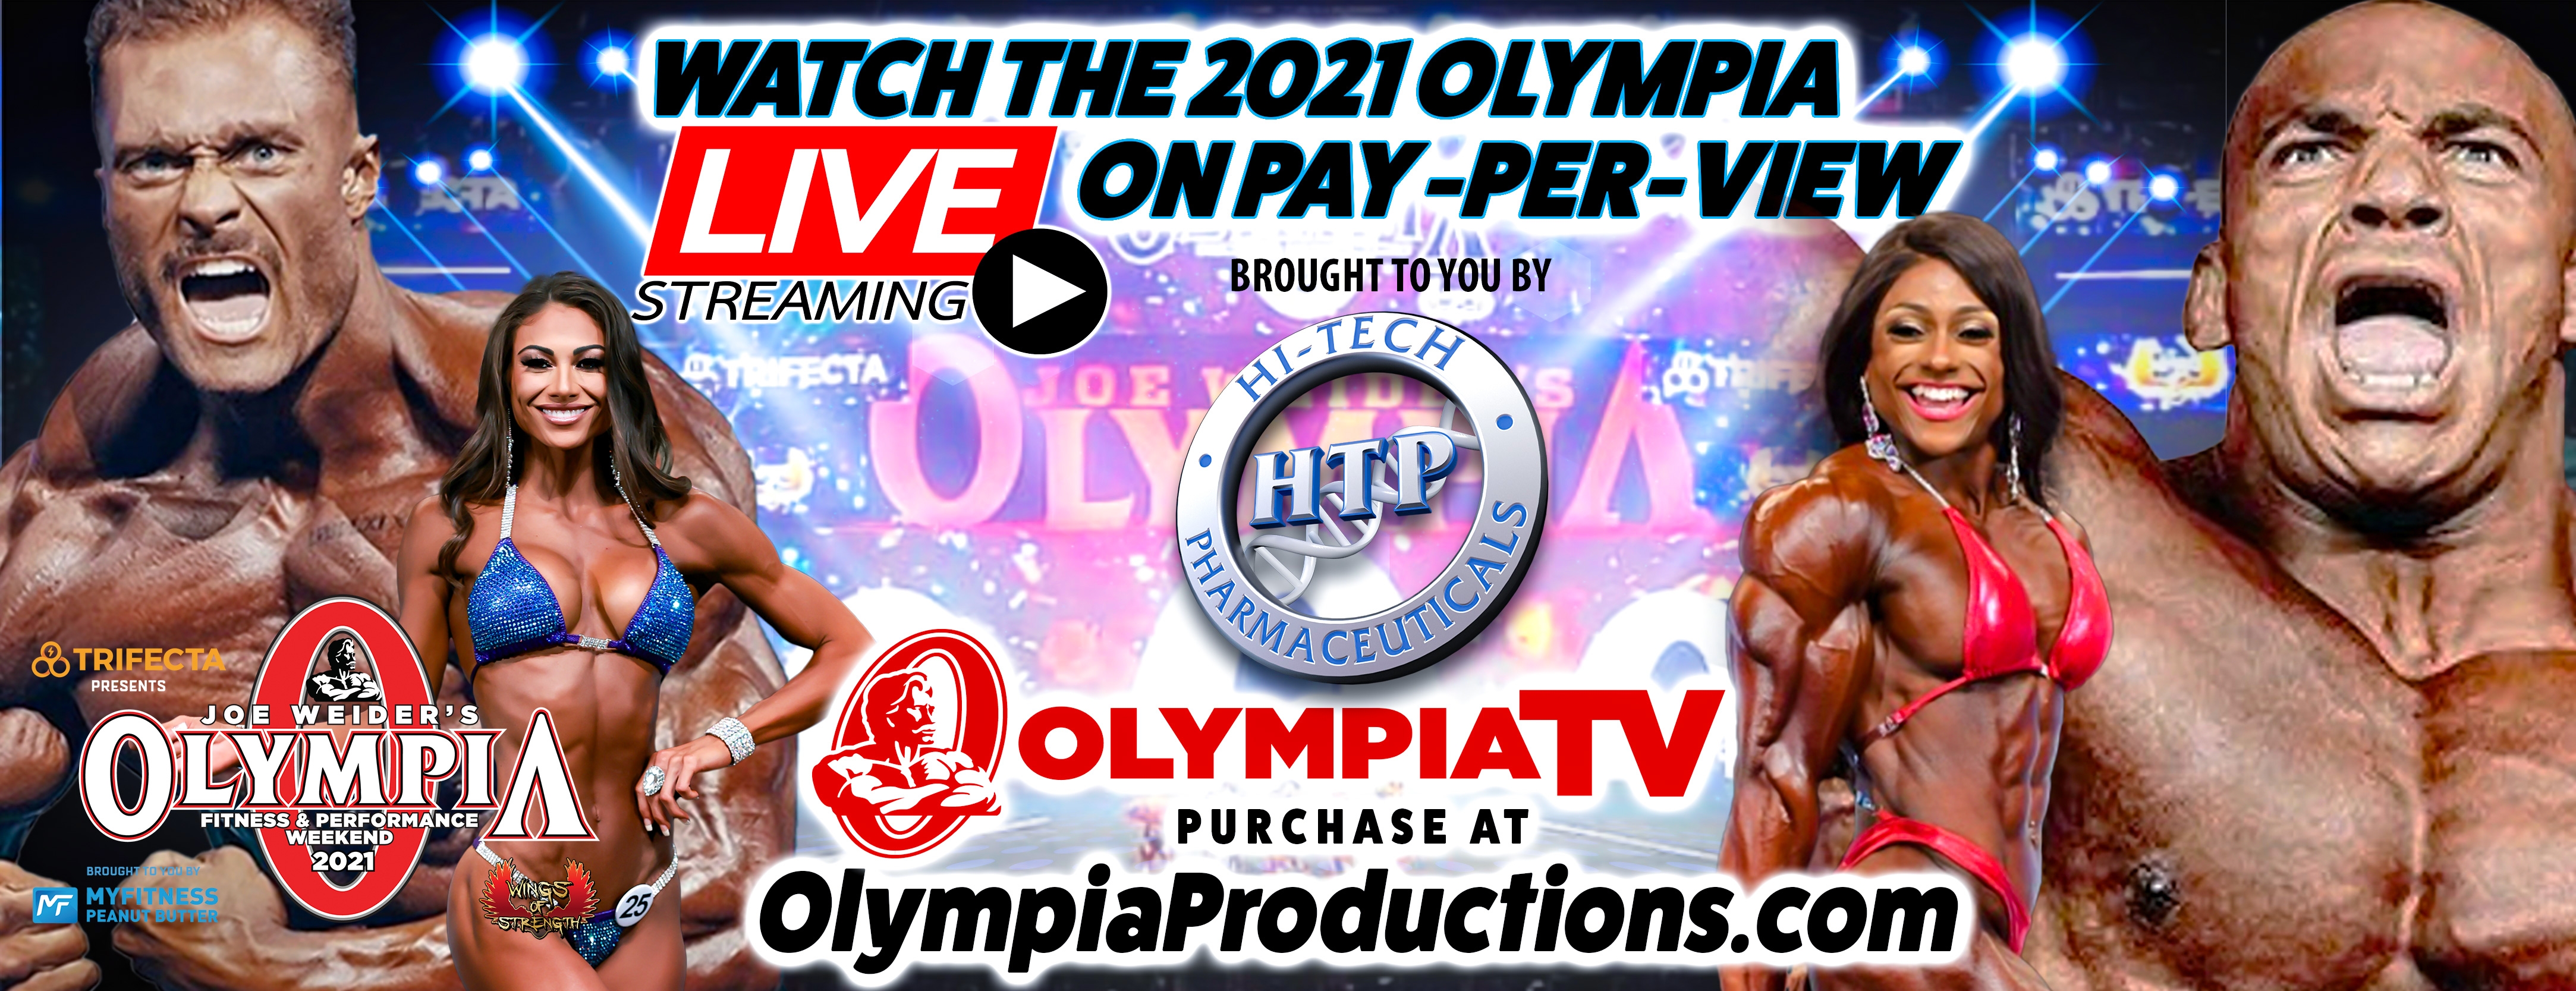 Women's Physique Title Up for Grabs at Friday's 2022 Olympia